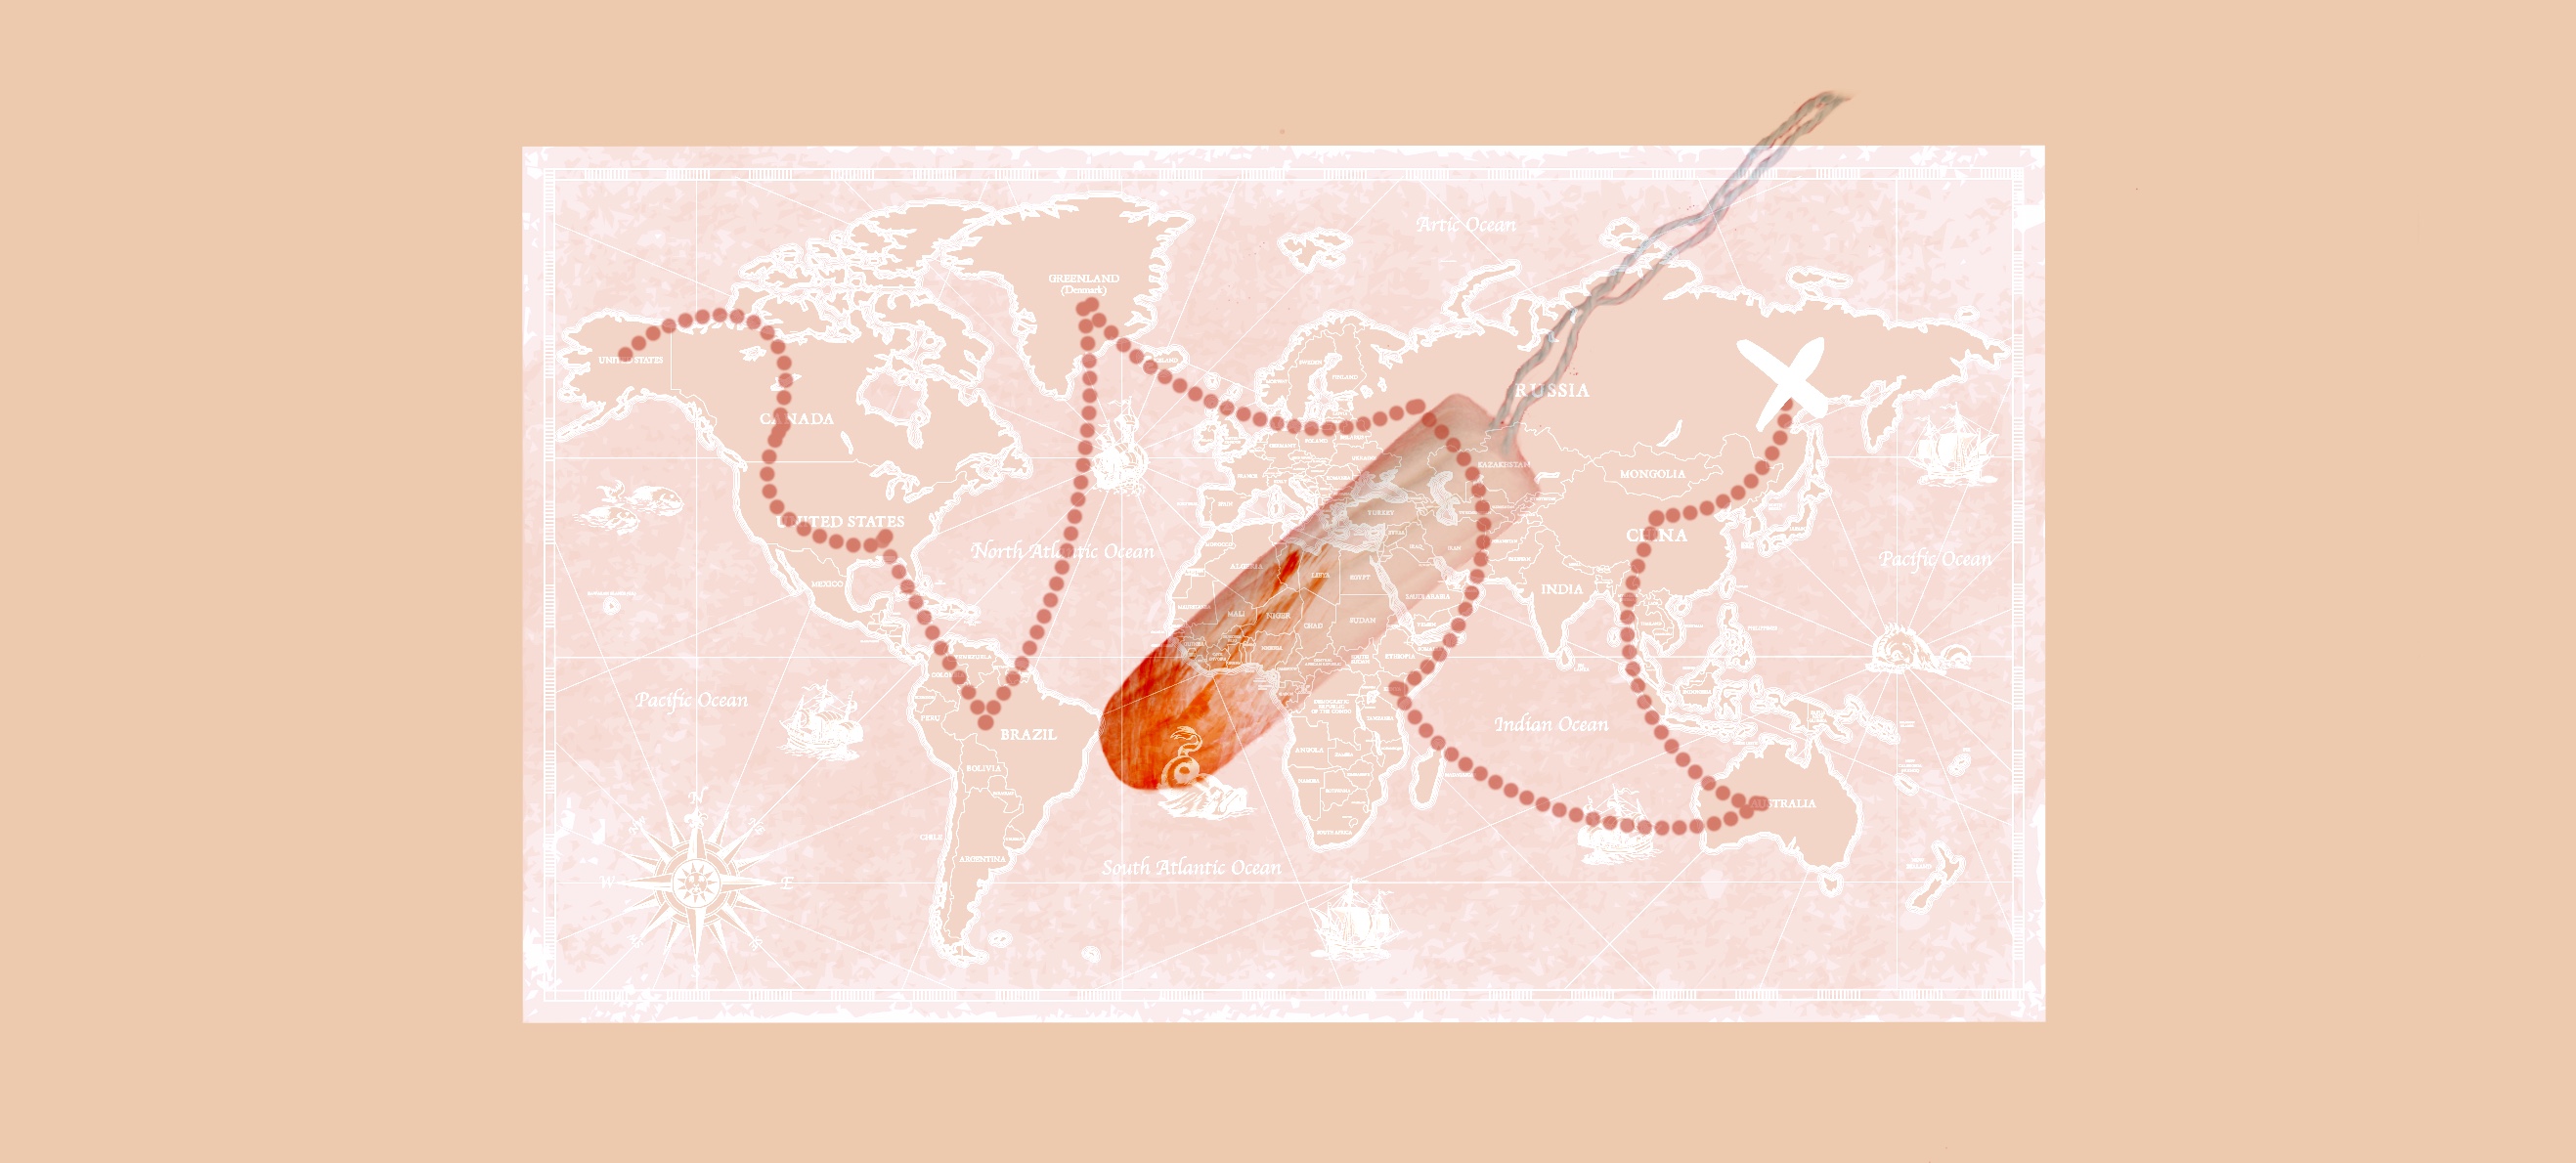 A translucent map of the world with a dotted line from one side to the other overlays a slightly bloodied tampon.